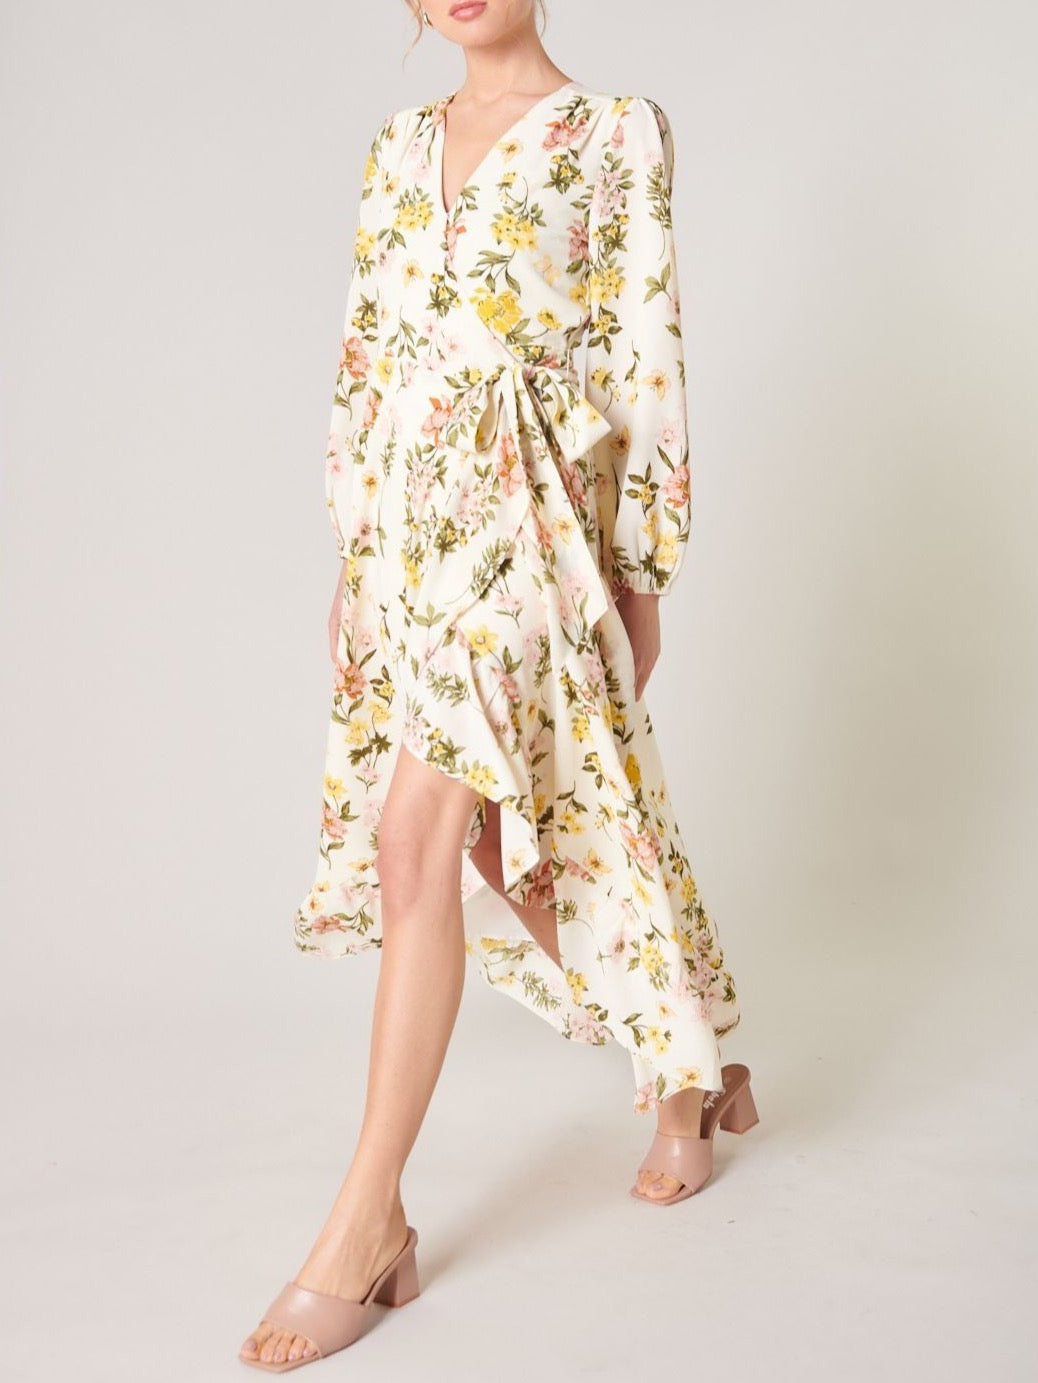 Model wearing the Ashlynn Floral Califa Maxi Wrap Dress by SUGARLIPS, featuring a flowing high-low hemline, long sleeves, and a vibrant print of yellow and pink flowers against a light cream background, complemented by beige strappy heels